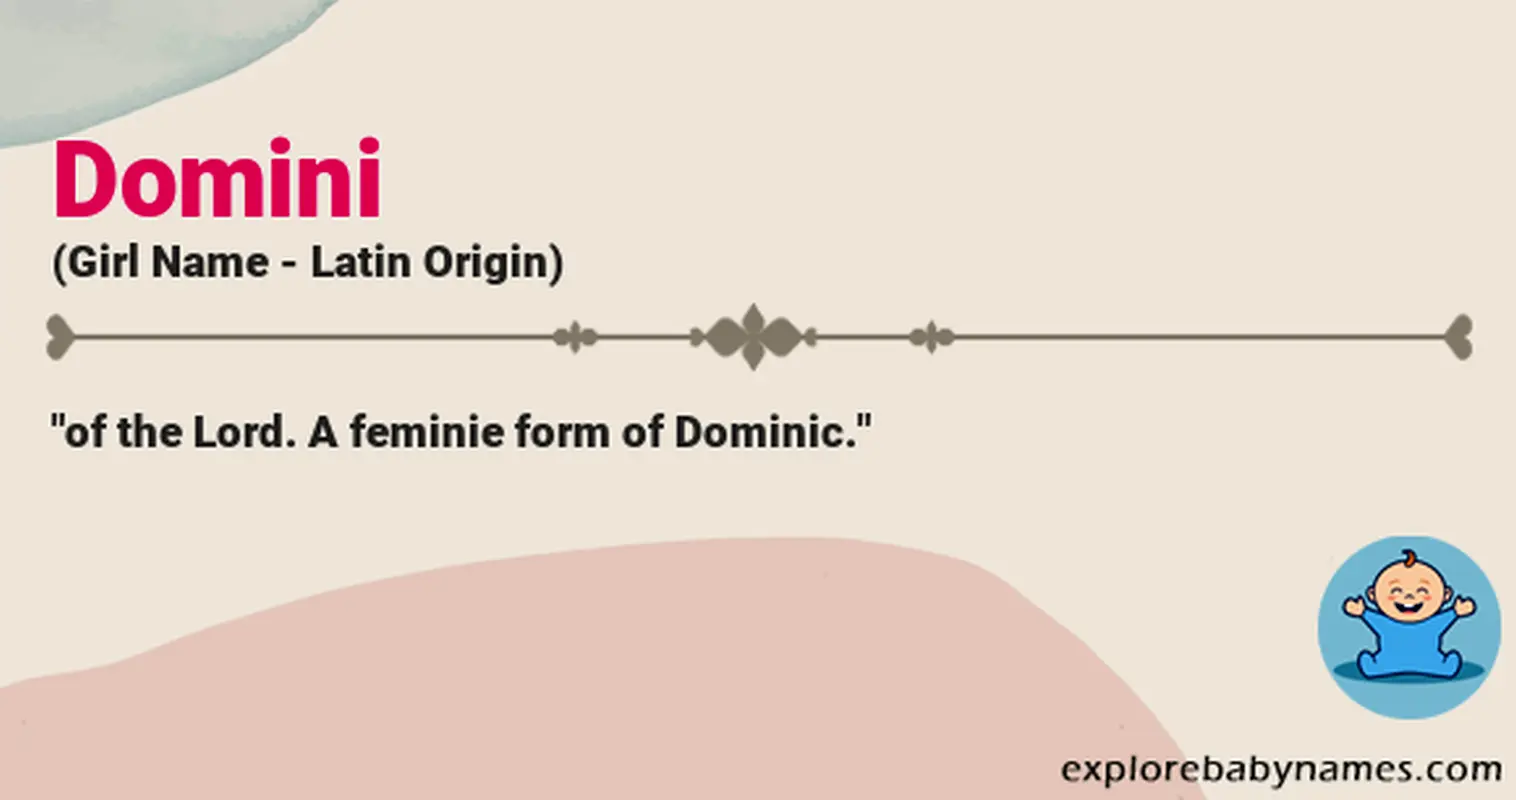 Meaning of Domini